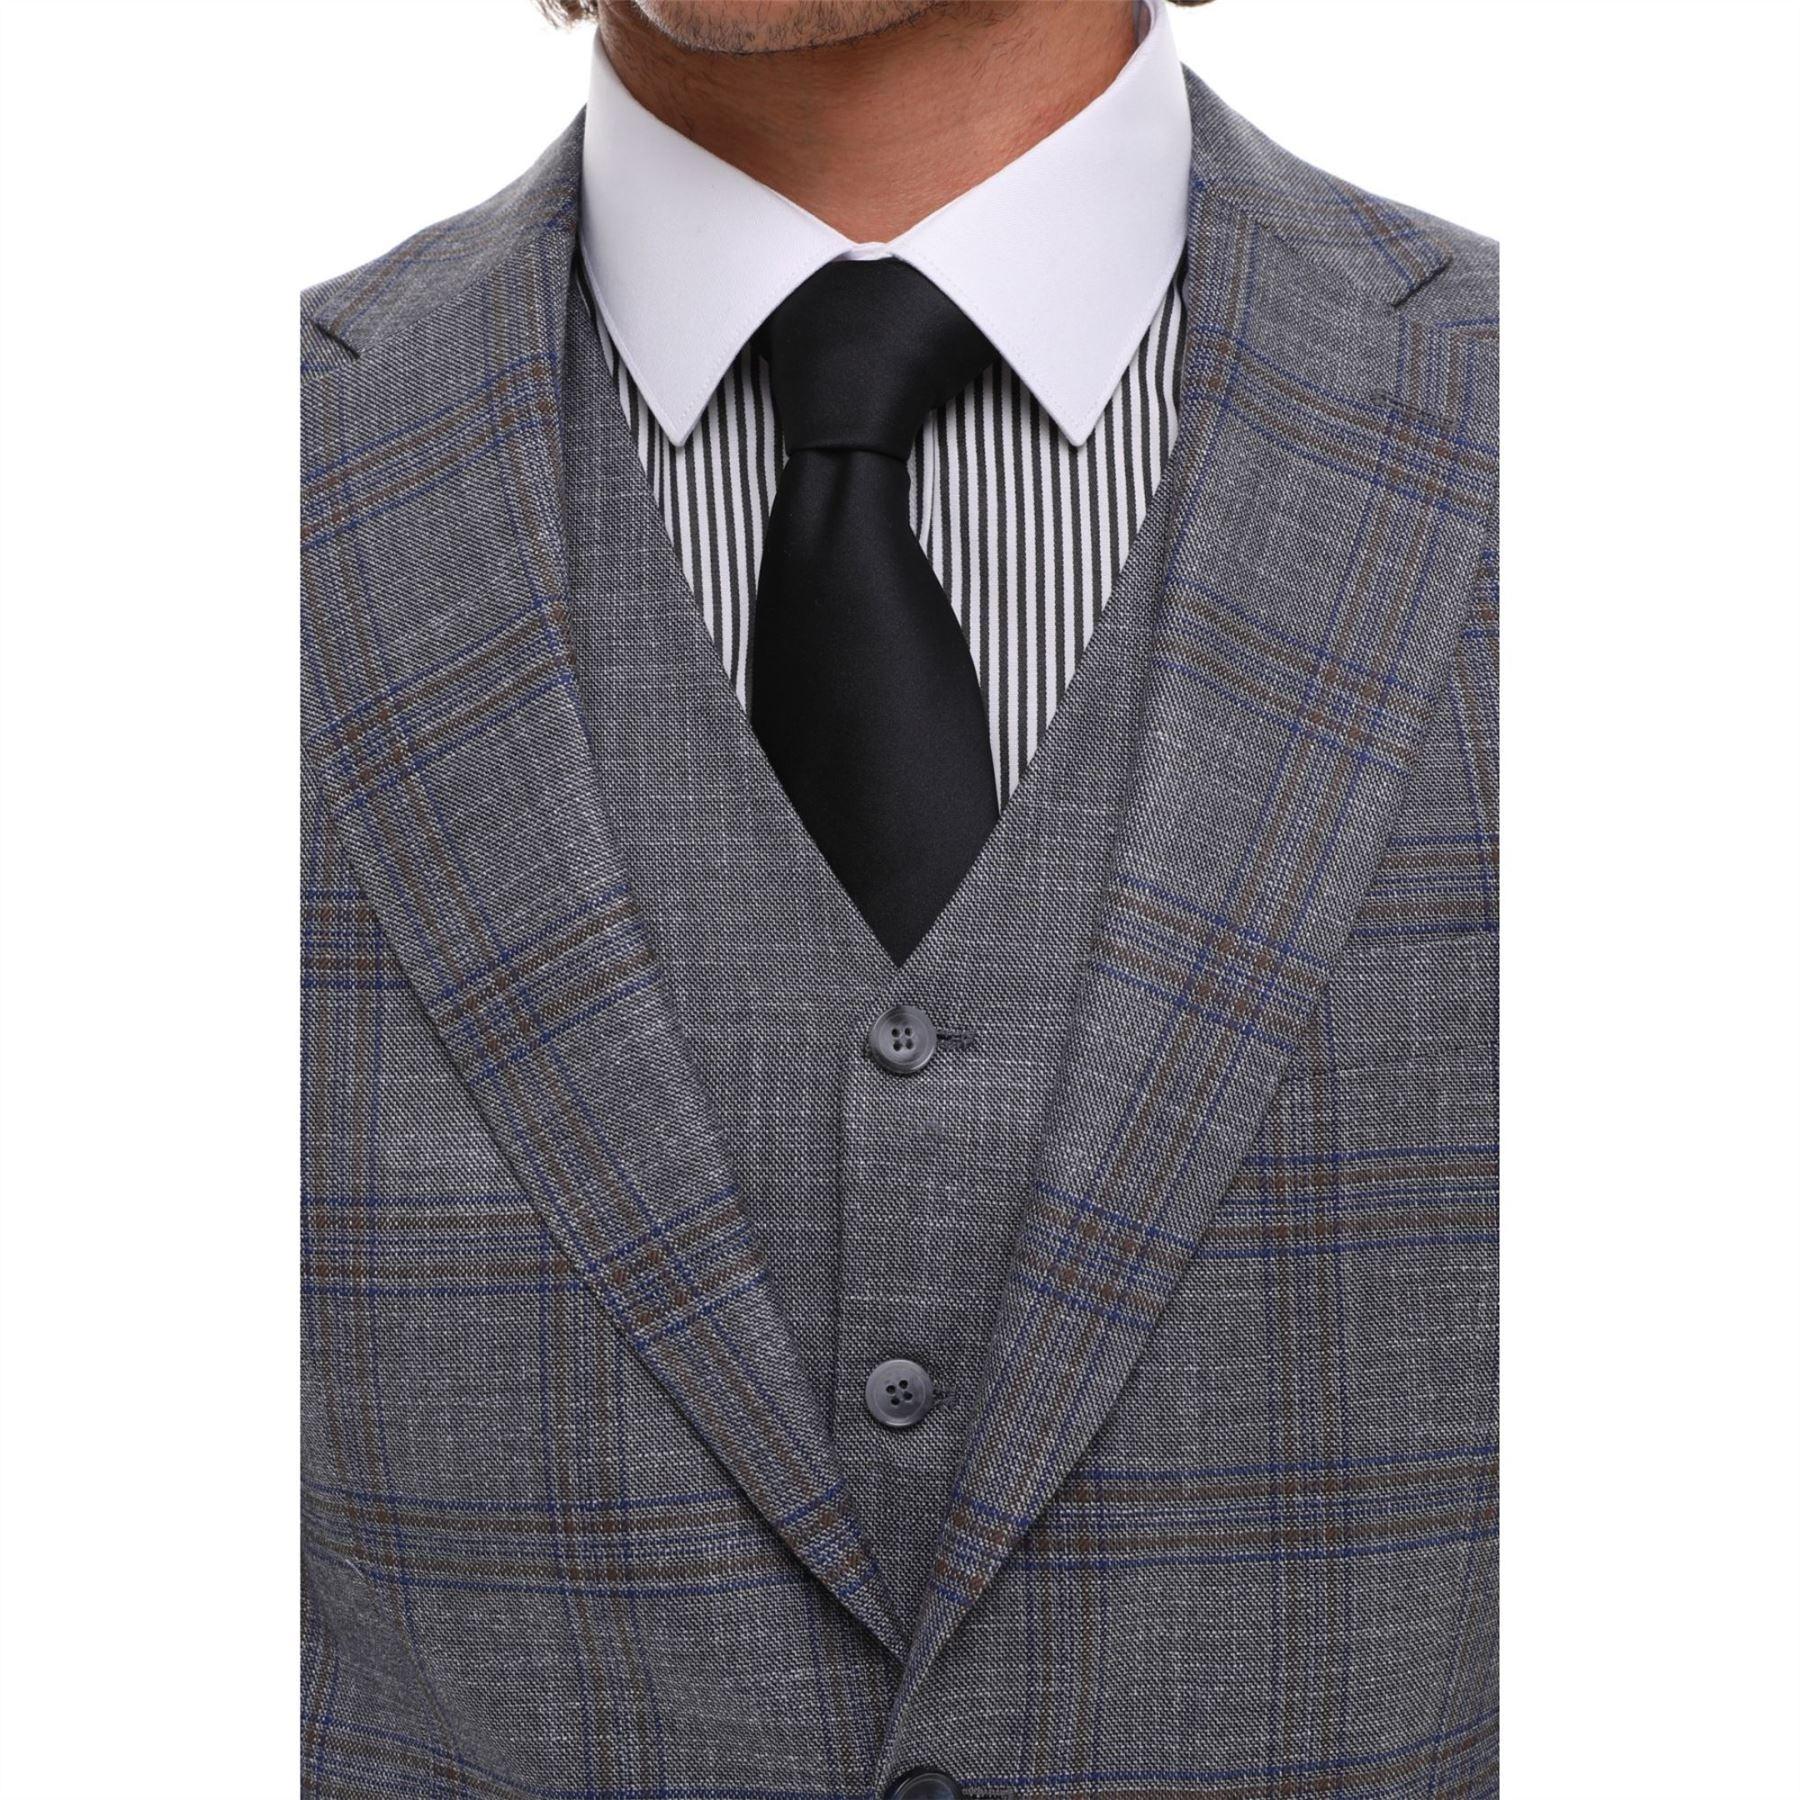 Mens 3 Piece Suit Grey Blue Check Contrasting Waistcoat Trouser Wedding Prom - Knighthood Store